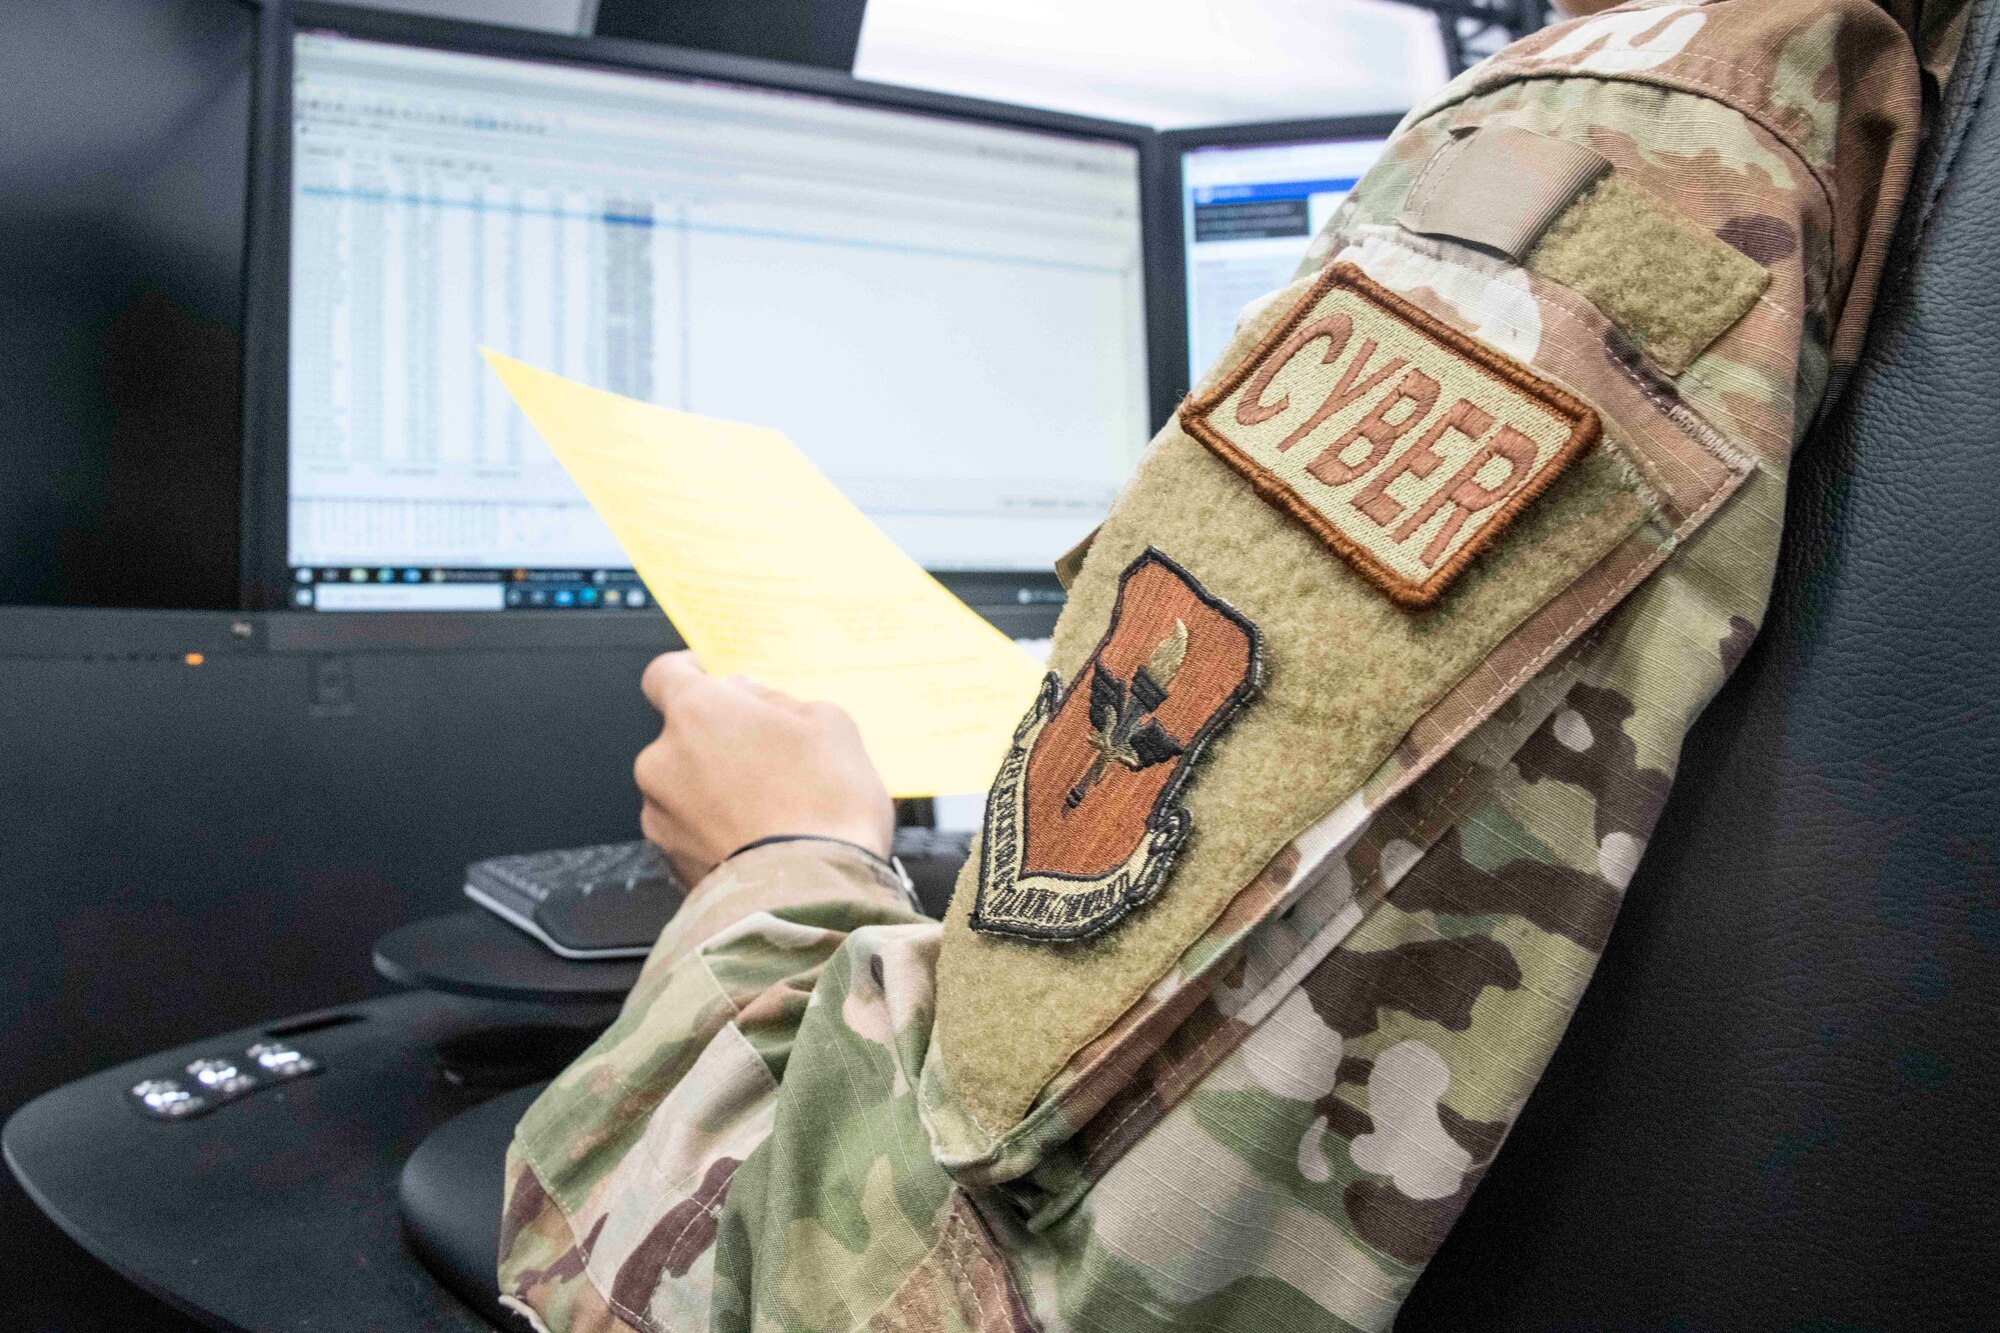 U.S. Air Force Senior Airman Kailan Almirol, 97th Communications Squadron (CS) Mission Defense Team cyber operator, looks over the instructions for the 97th CS Mission Defense Team’s first cyber defense exercise at Altus Air Force Base, Oklahoma, Sept. 30, 2021. In a real-life scenario, members of the MDT need this familiarization when working as a team in cyber defense missions. (U.S. Air Force photo by Staff Sgt. Cody Dowell)